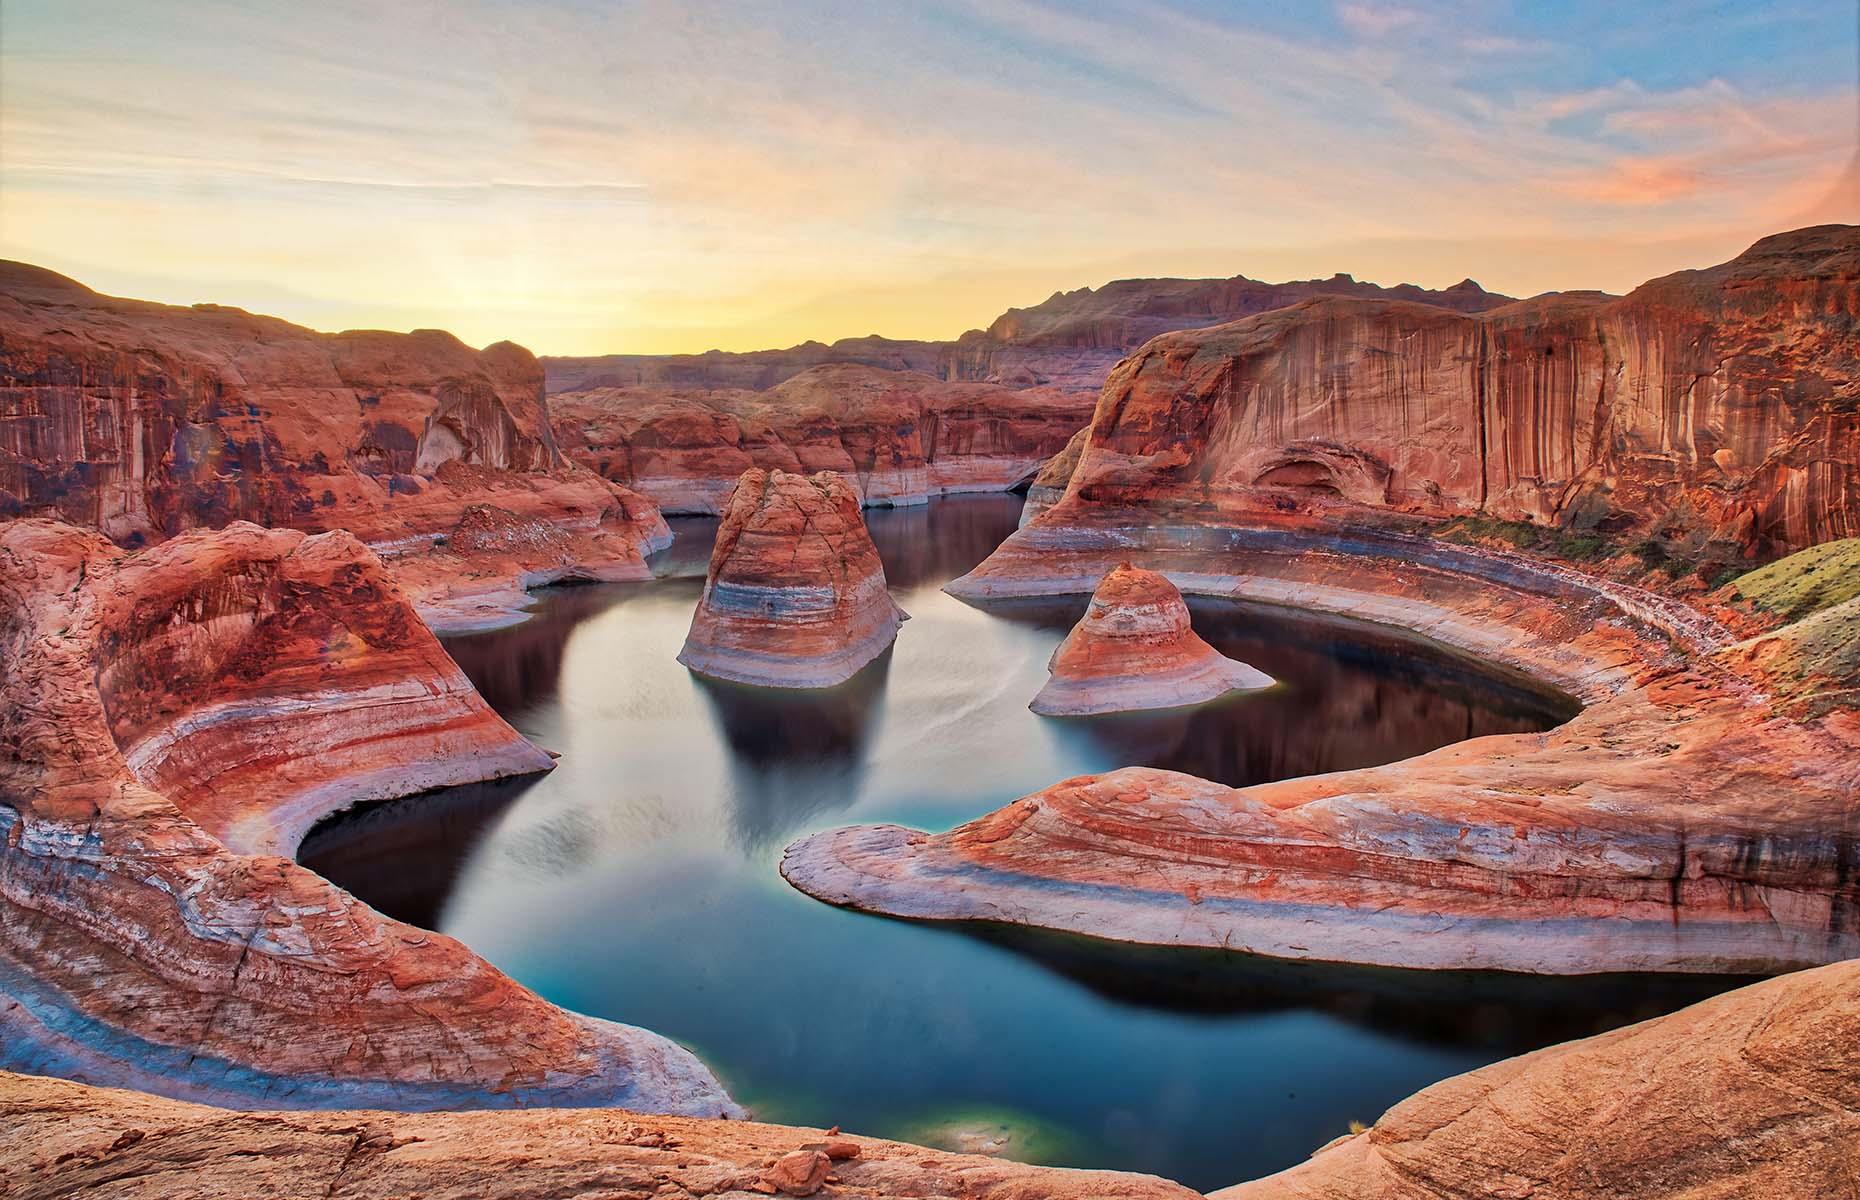 The state of Utah has a bounty of scenic vistas, from the jagged rocks of Bryce Canyon to the green peaks of Wasatch Mountain State Park up north. But one of the most impressive bird's-eye views is of Reflection Canyon, a dramatic rock formation in the Glen Canyon National Recreation Area. Here the remote canyon can be seen in all its glory.